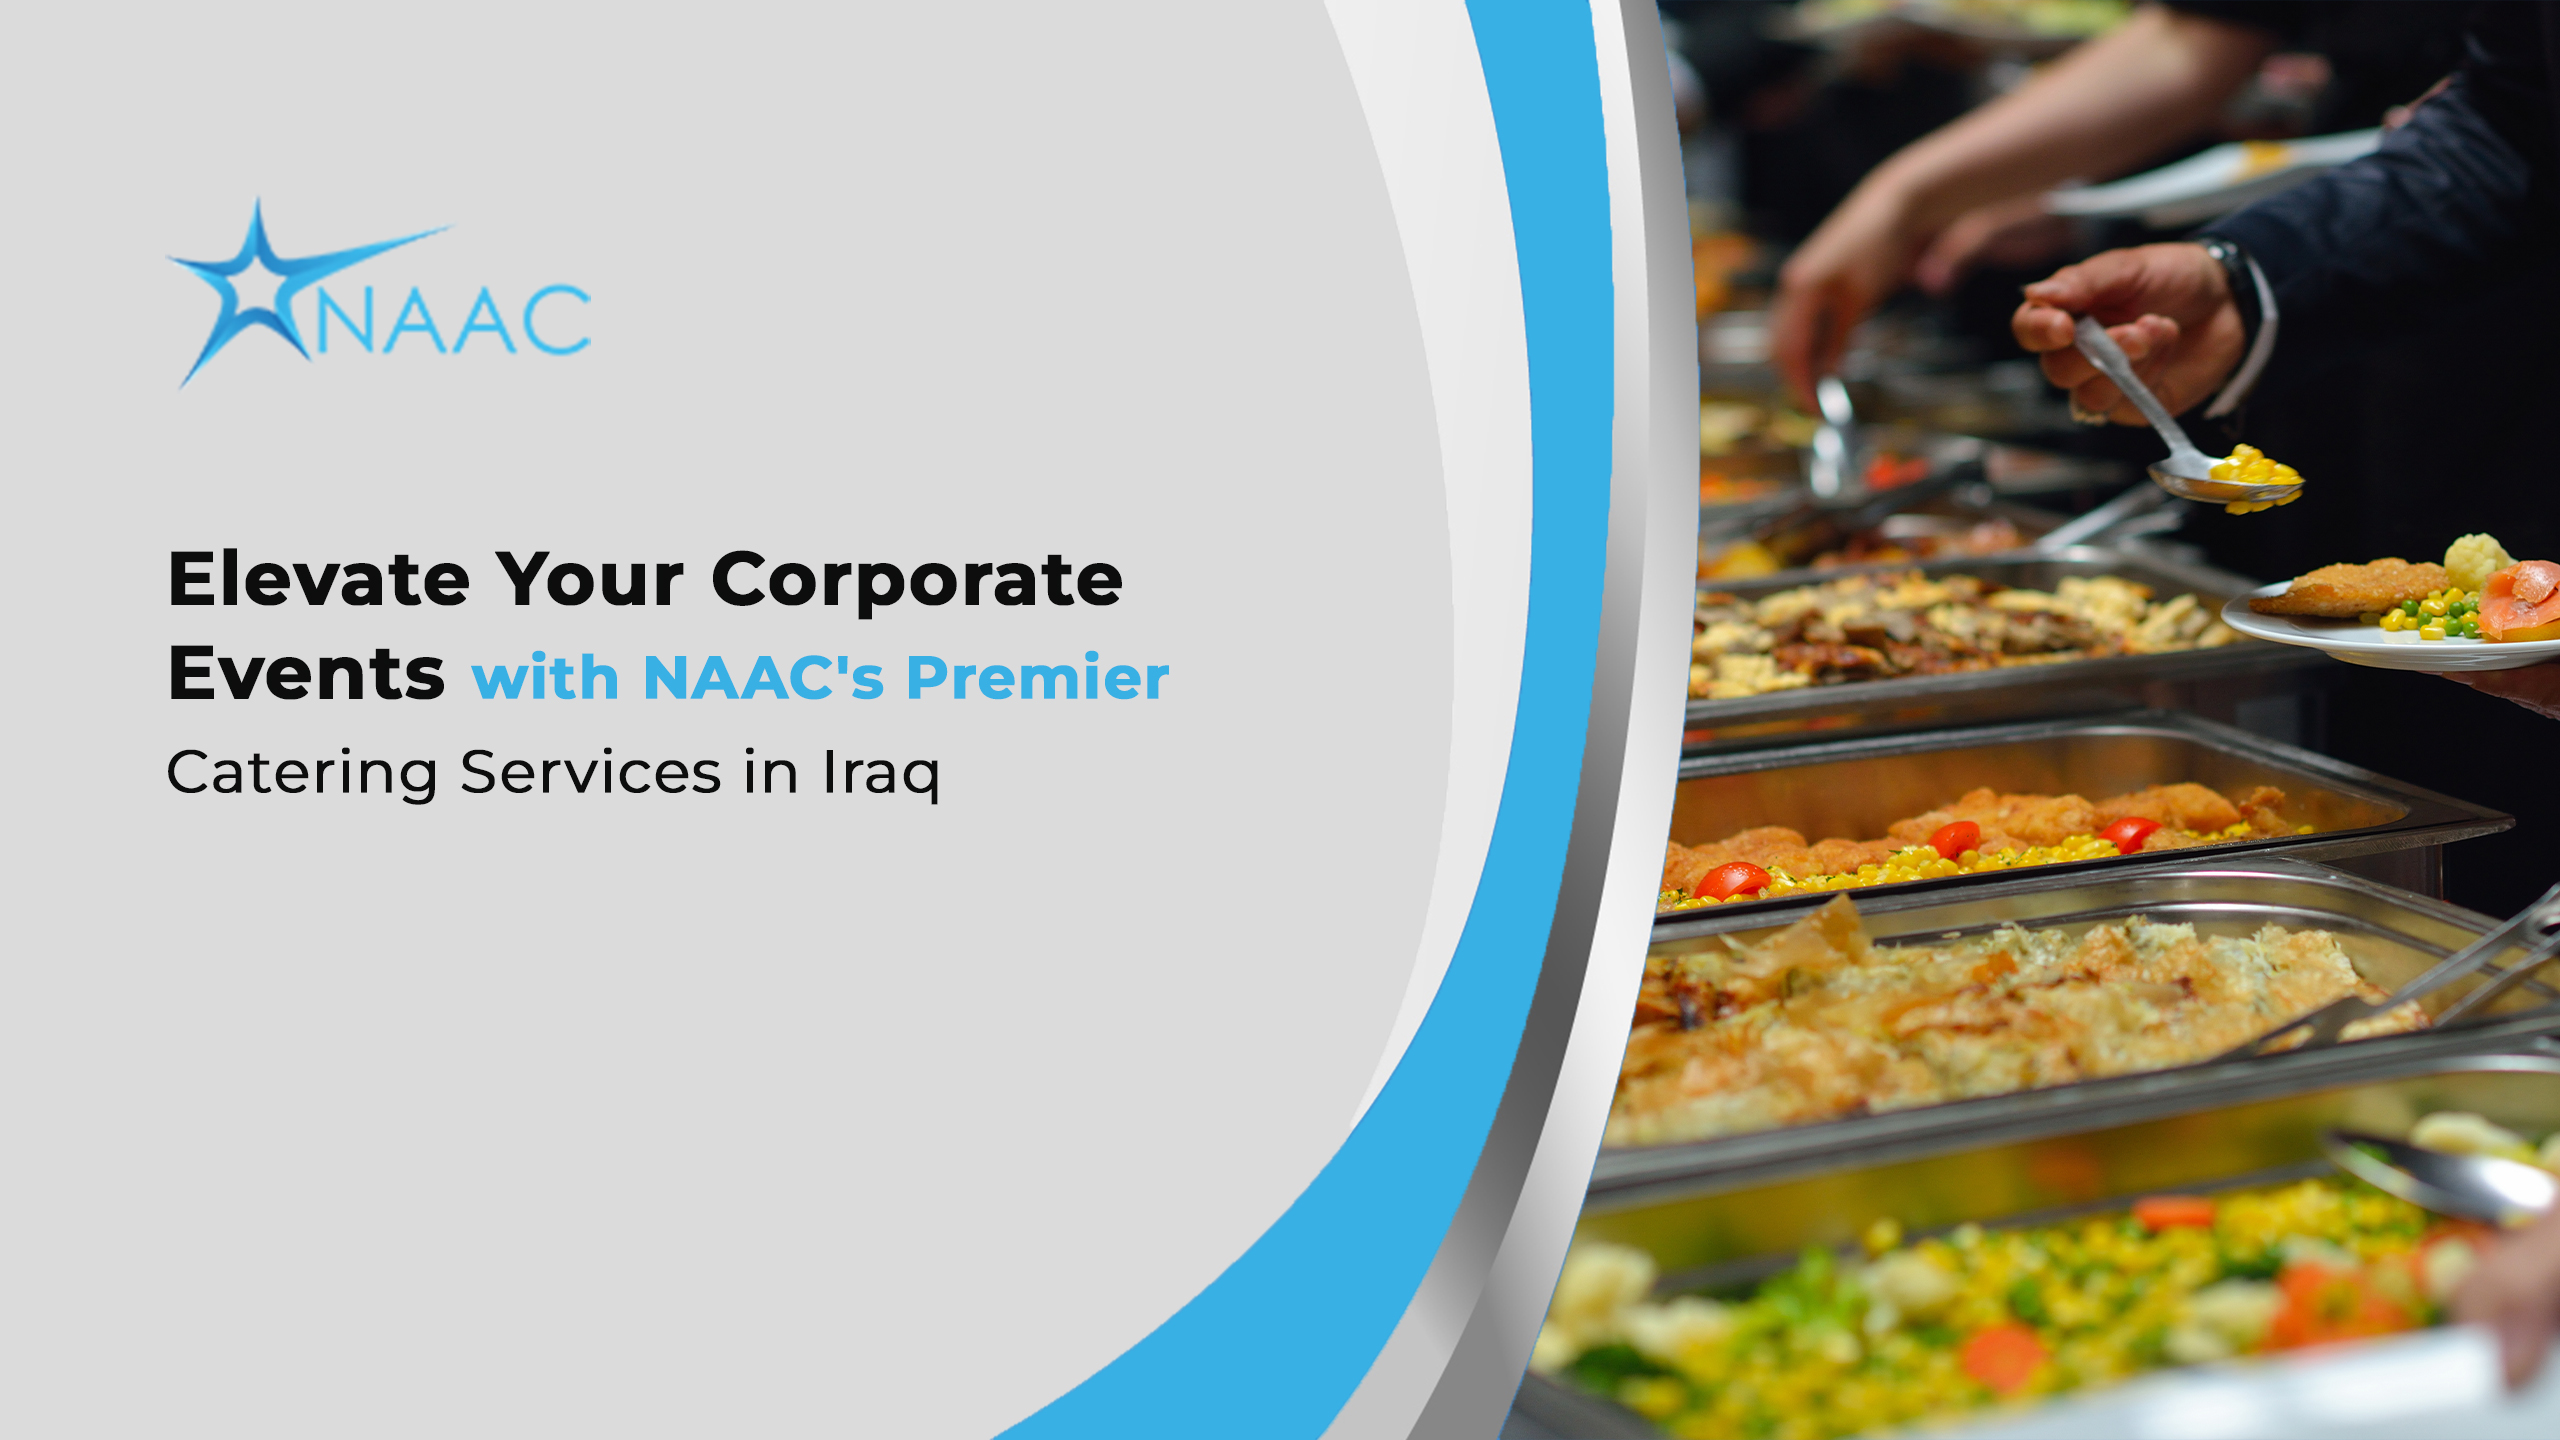 Elevate Your Corporate Events with NAAC's Premier Catering Services in Iraq